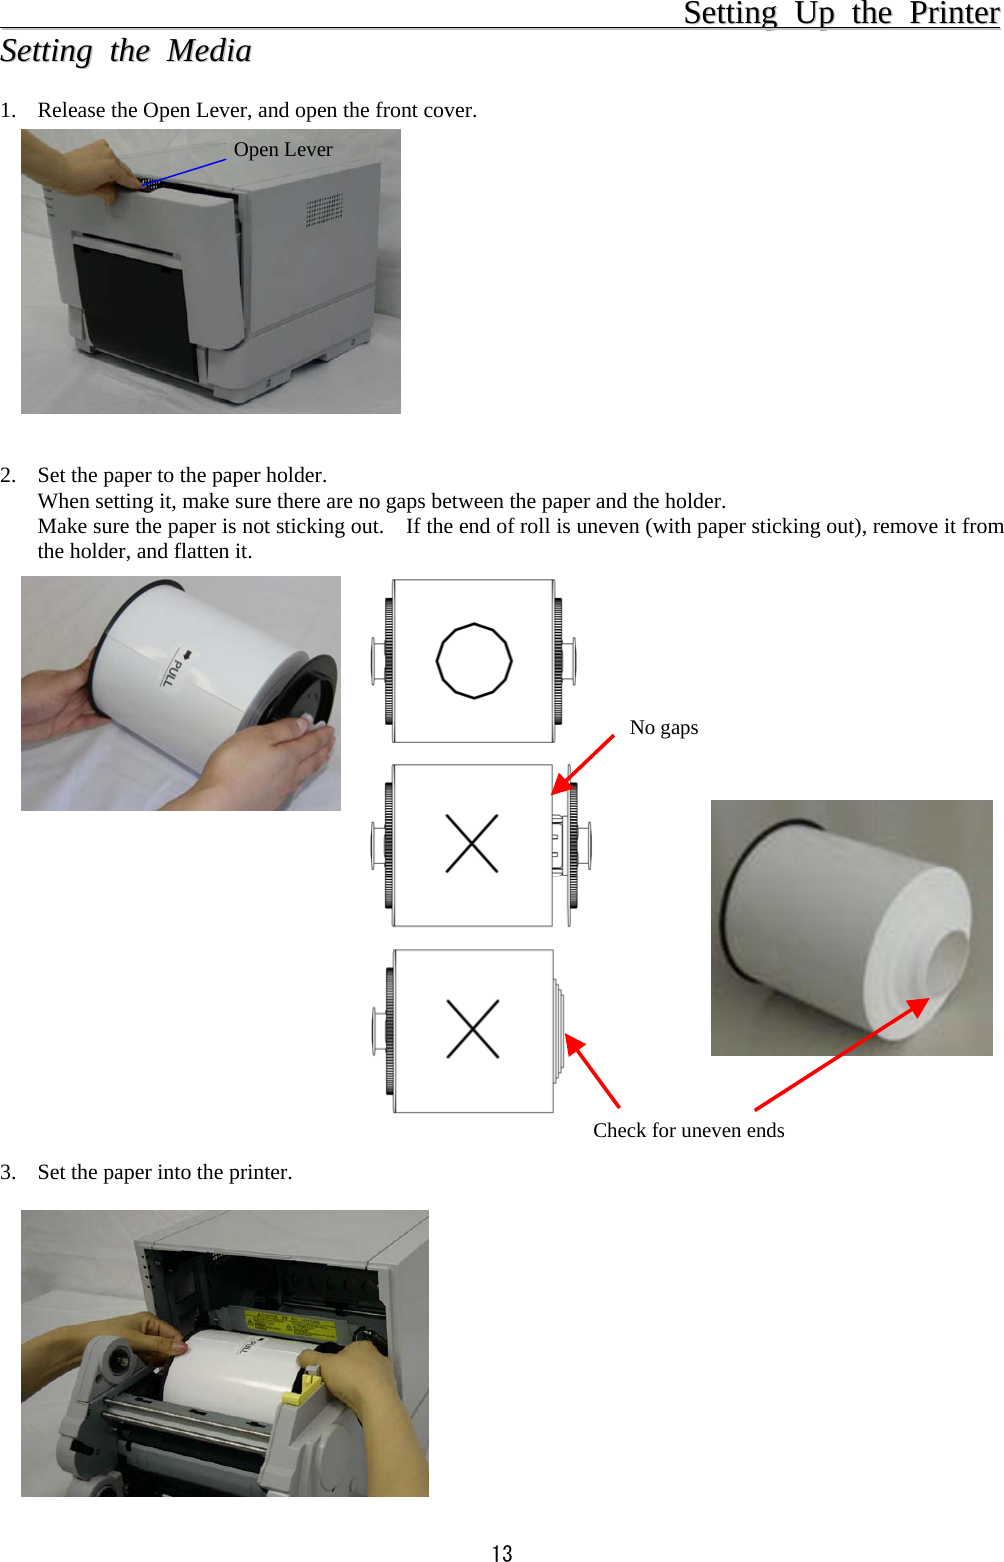  13                                                                                  SSeettttiinngg  UUpp  tthhee  PPrriinntteerr  SSeettttiinngg  tthhee  MMeeddiiaa   1.  Release the Open Lever, and open the front cover.             2.  Set the paper to the paper holder. When setting it, make sure there are no gaps between the paper and the holder. Make sure the paper is not sticking out.    If the end of roll is uneven (with paper sticking out), remove it from the holder, and flatten it.                      3.  Set the paper into the printer.            Open Lever No gapsCheck for uneven ends 